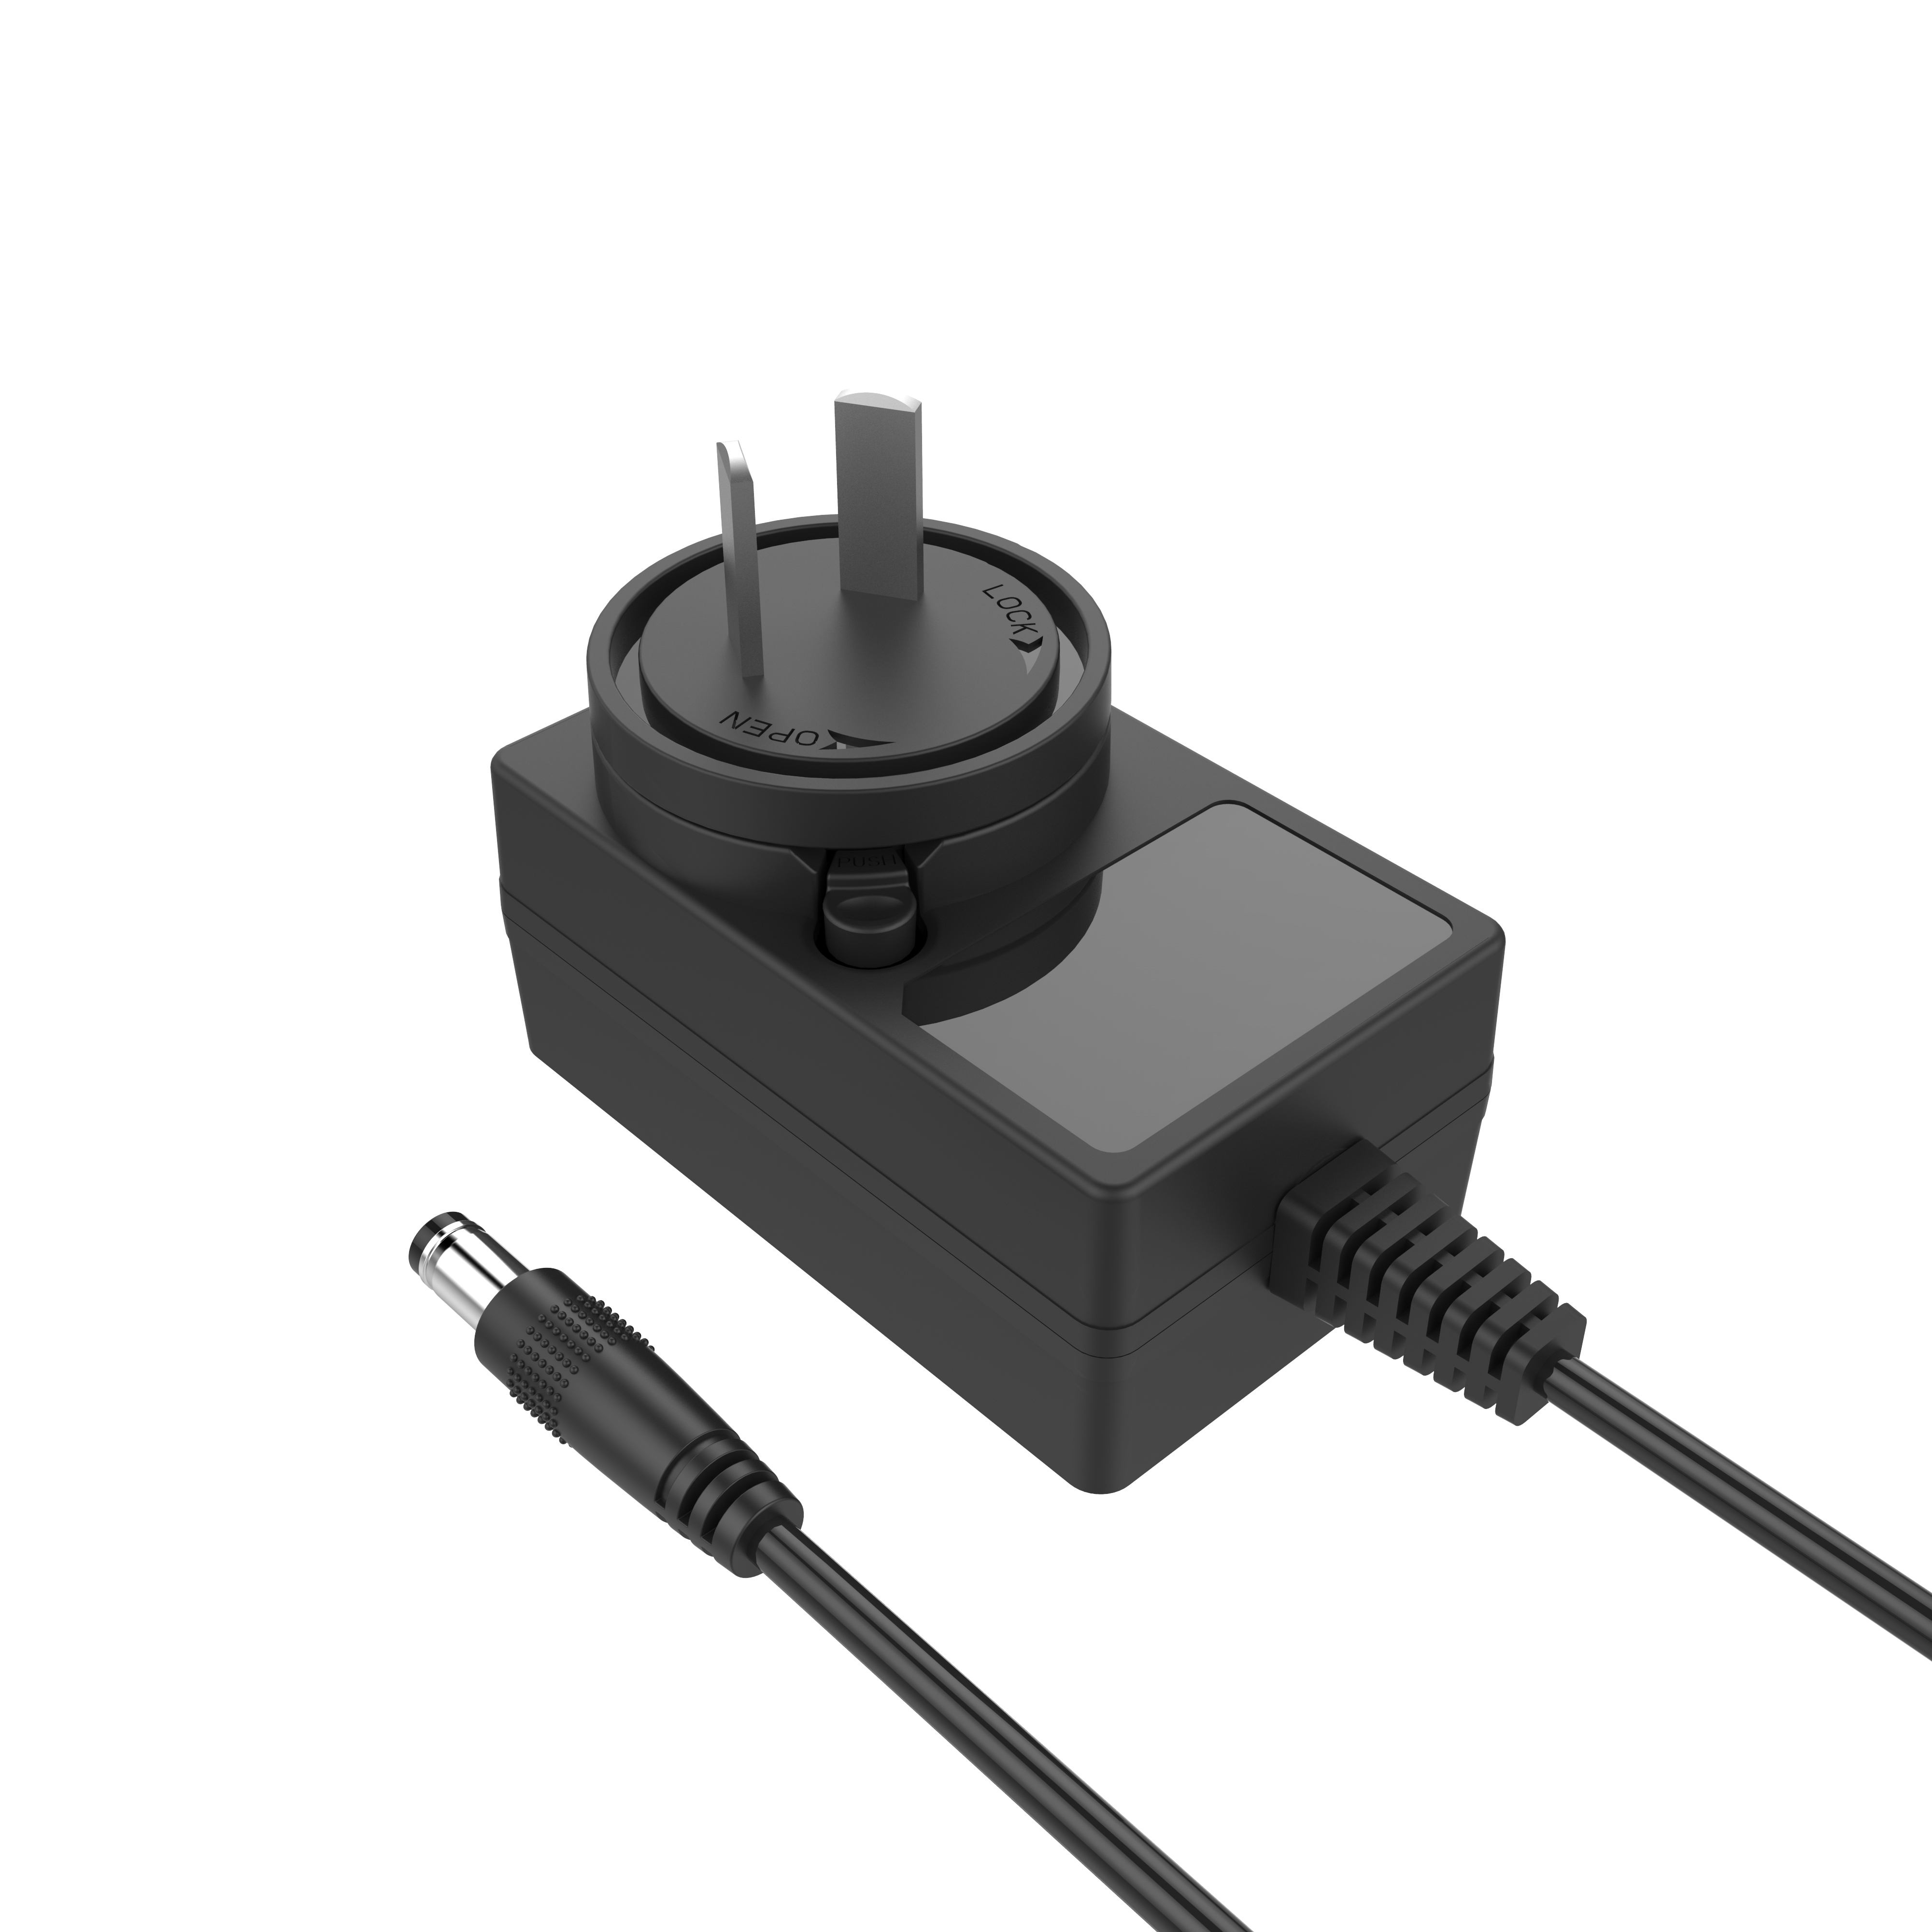 5v 2a charger 5v 2.5a interchangeable plug power adapter with CB/CE/GS/EMC/LVD/SAA/KC/FCC/PSE/CCC